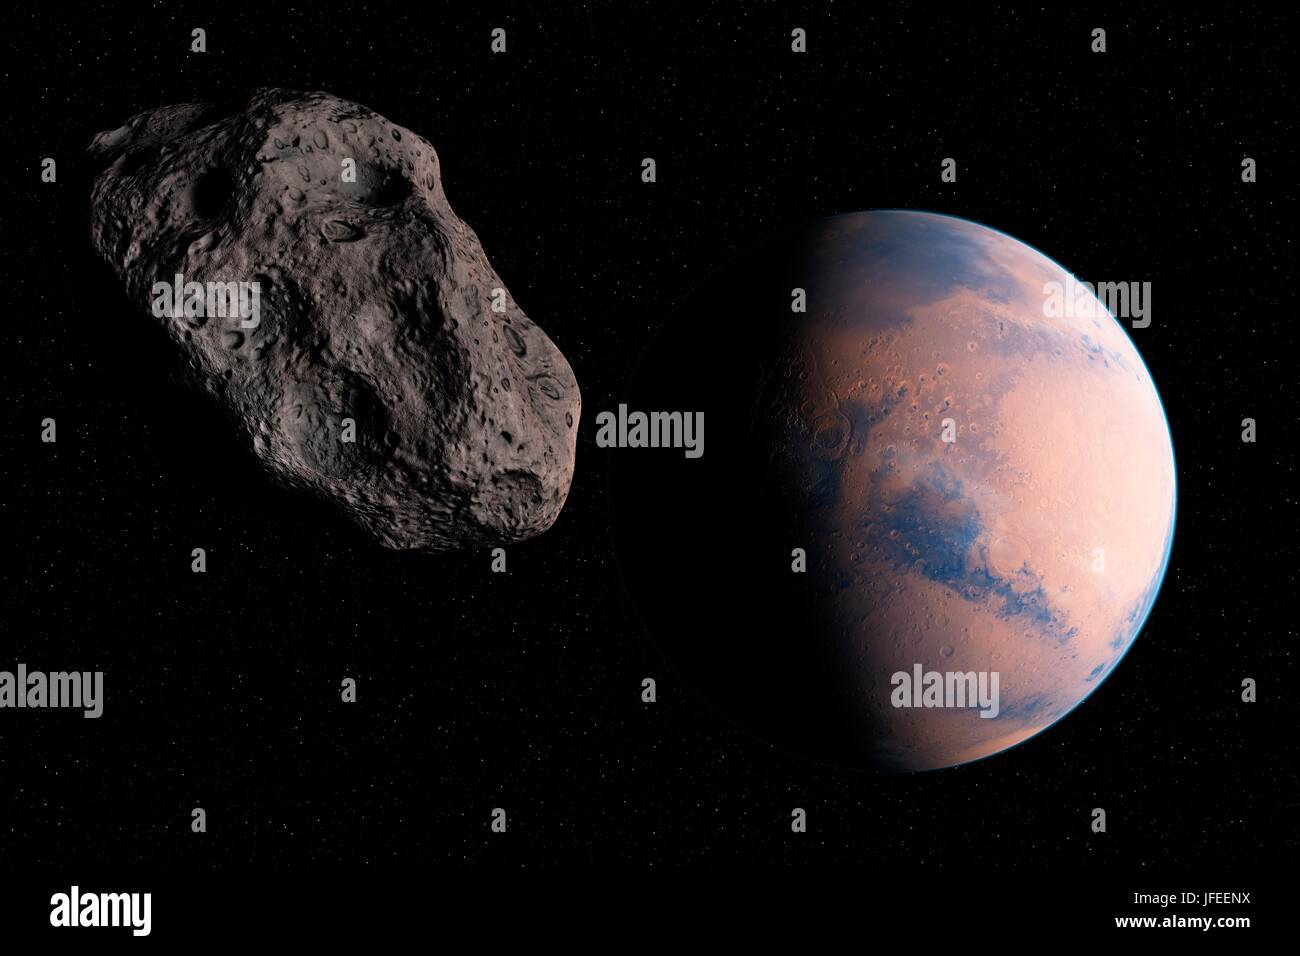 Planet and asteroid in space, illustration. Stock Photo